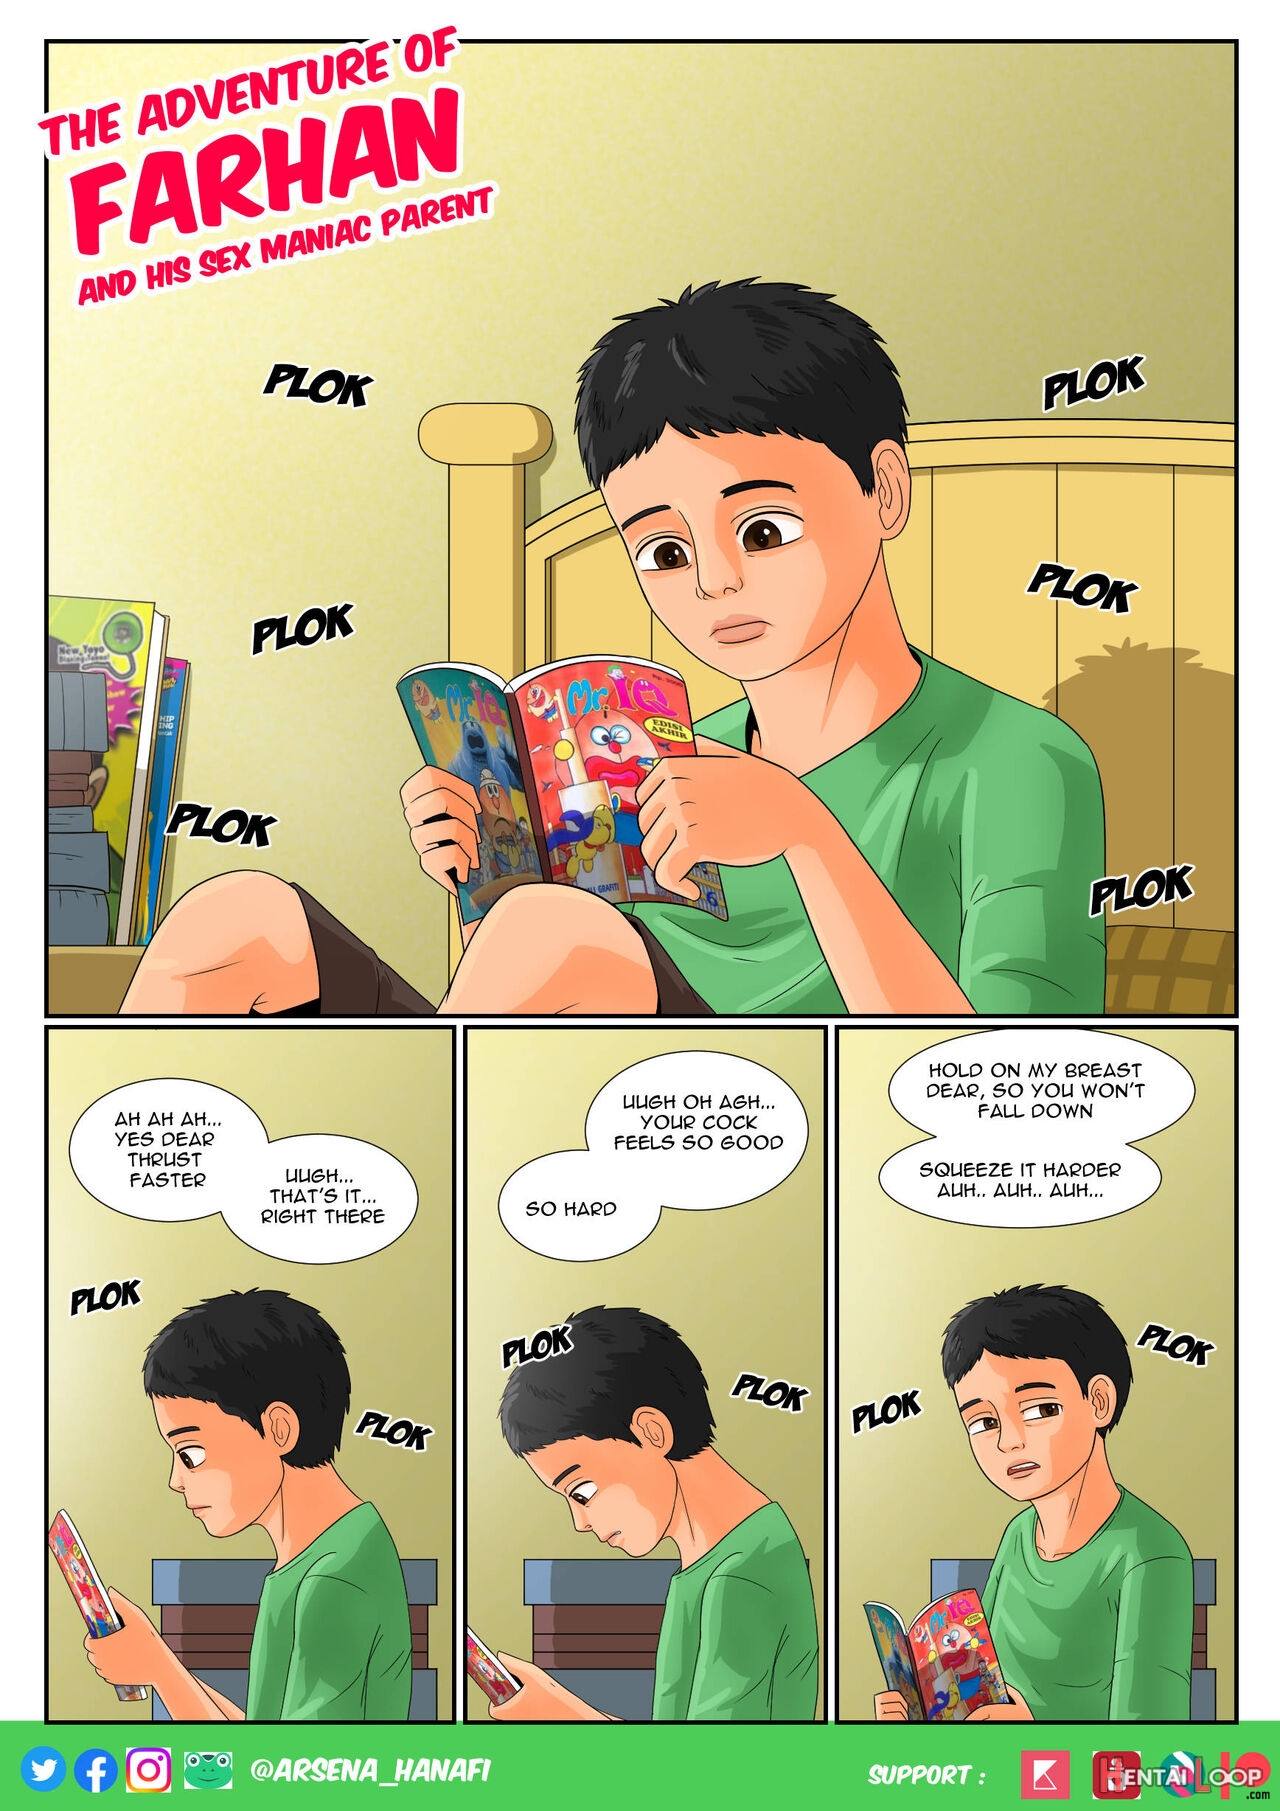 The Adventure Of Farhan And His Sex Maniac Parent #5 page 1